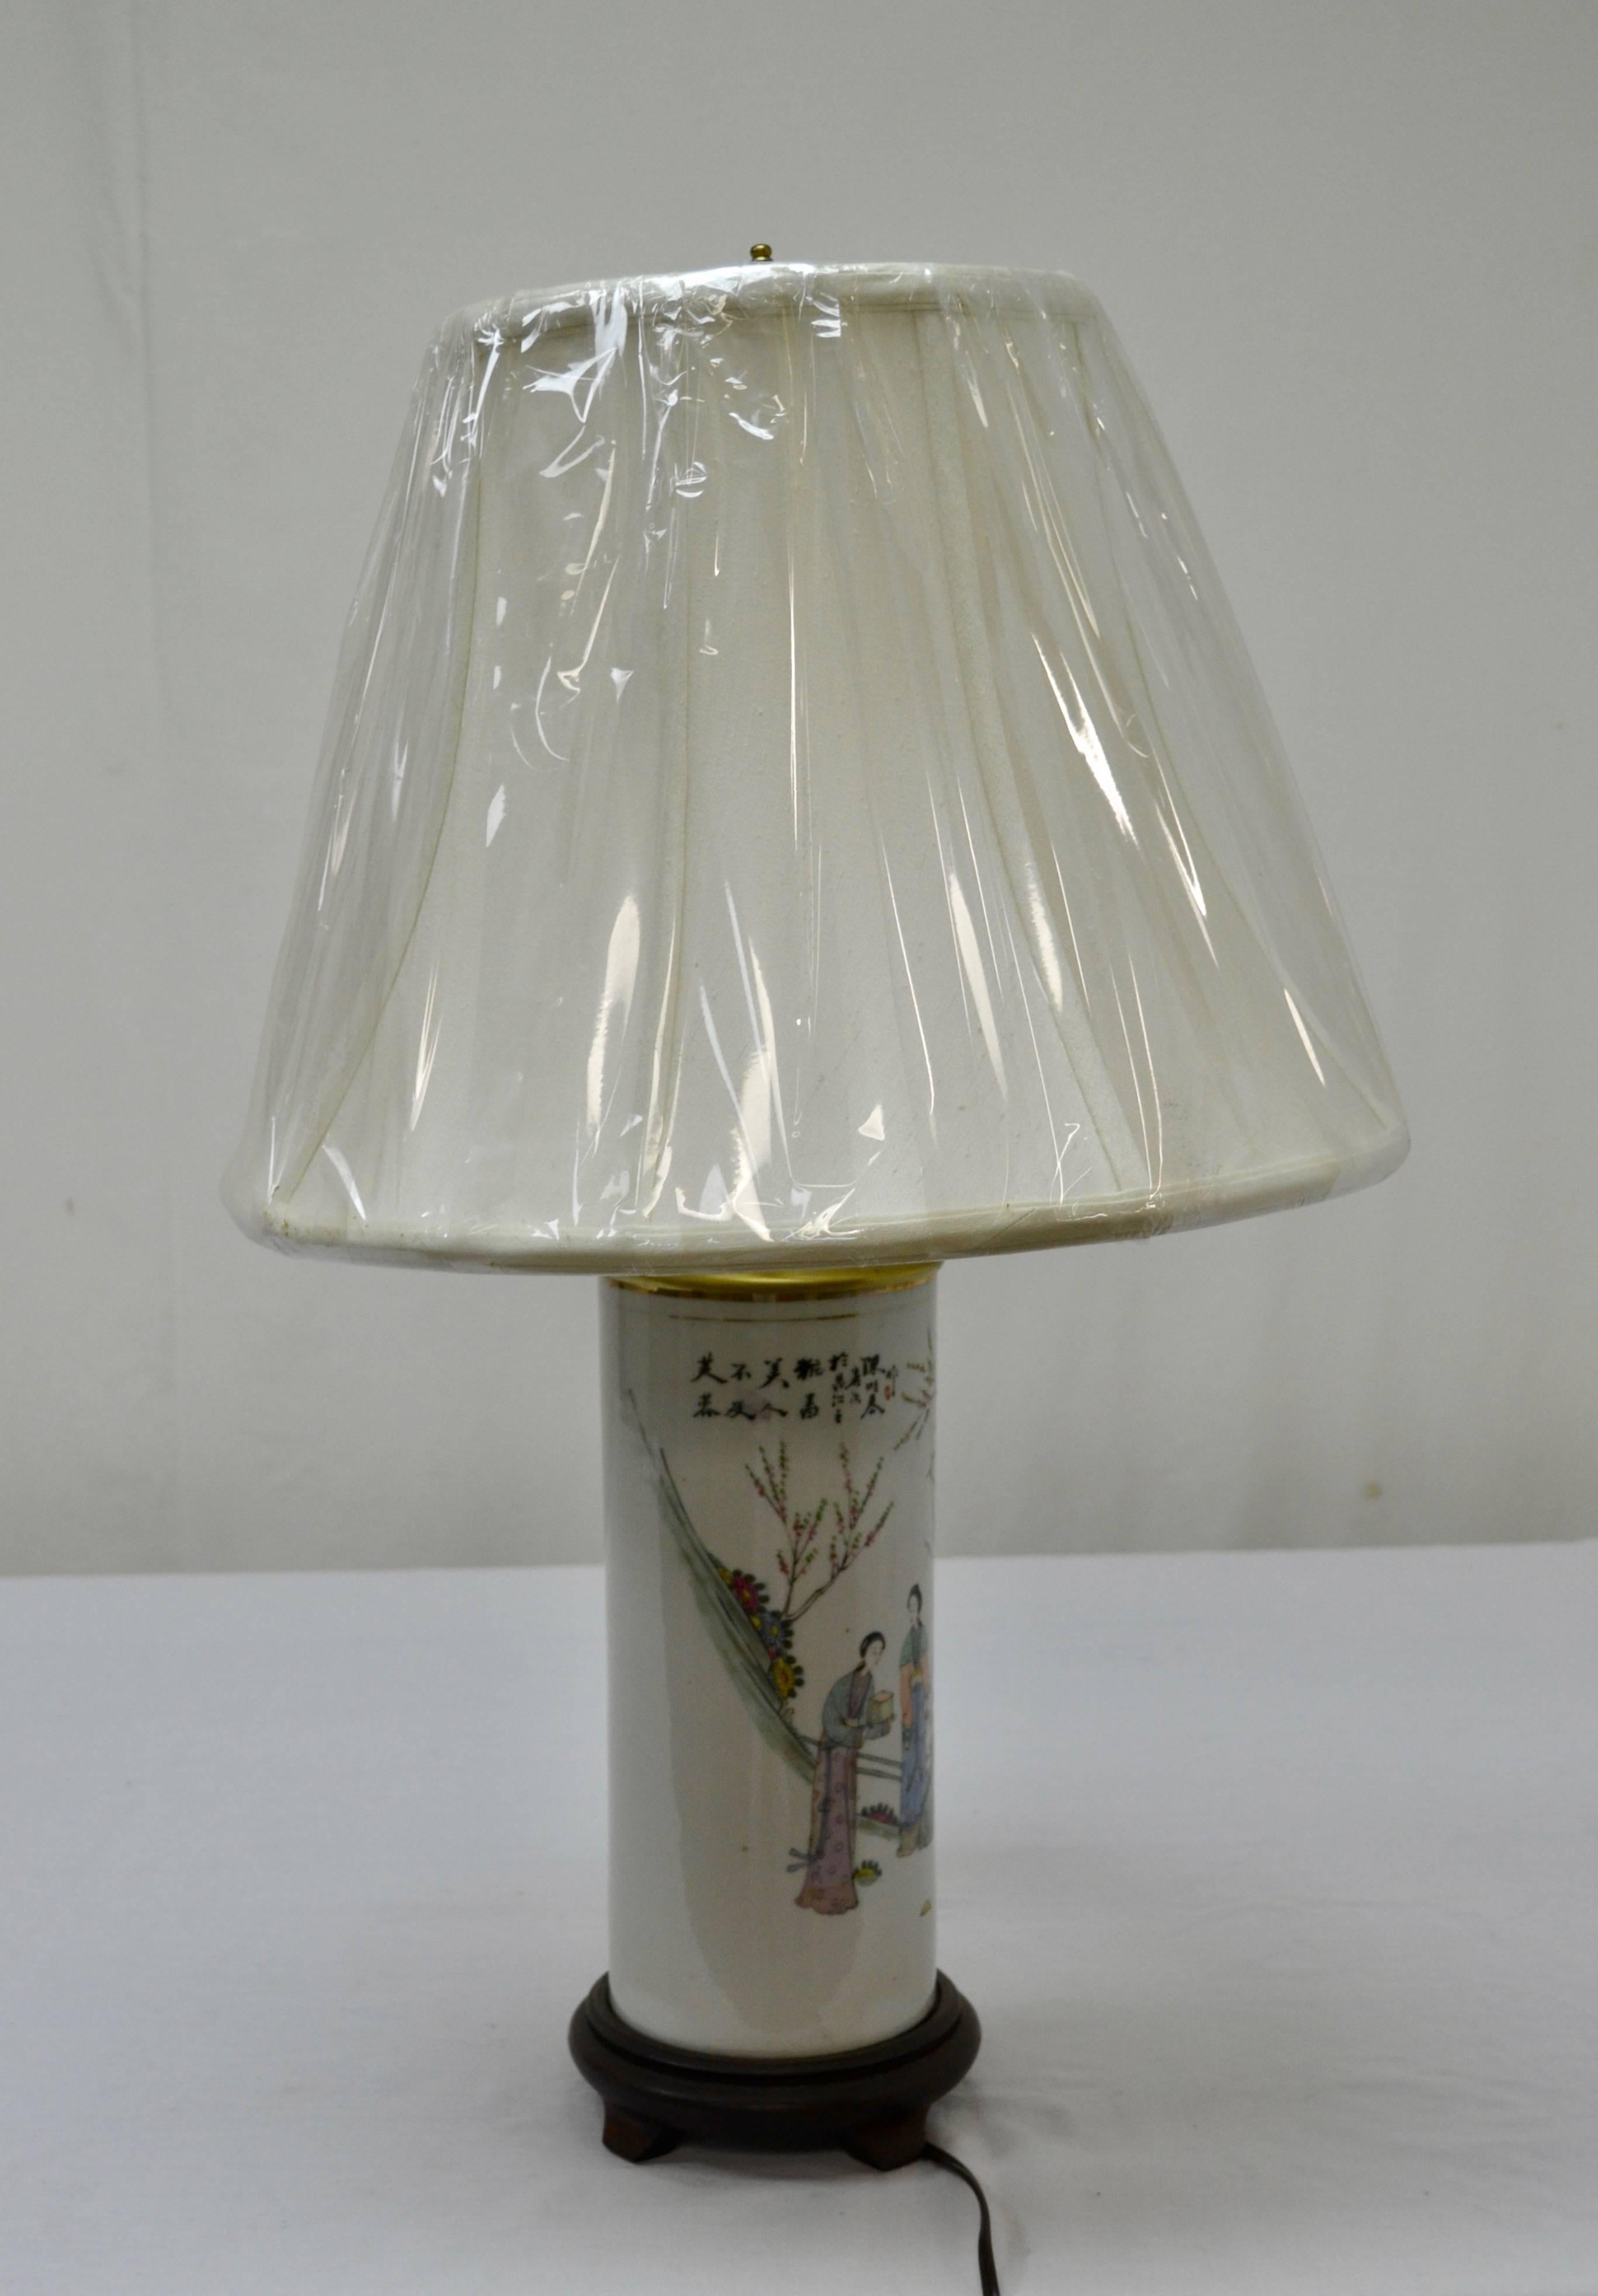 This is a colourful antique Chinese porcelain hat stand, depicting a group of women in a traditional Chinese setting, converted into an elegant table lamp with a fine linen shade and mounted on a footed hardwood base. Shade dimensions 16